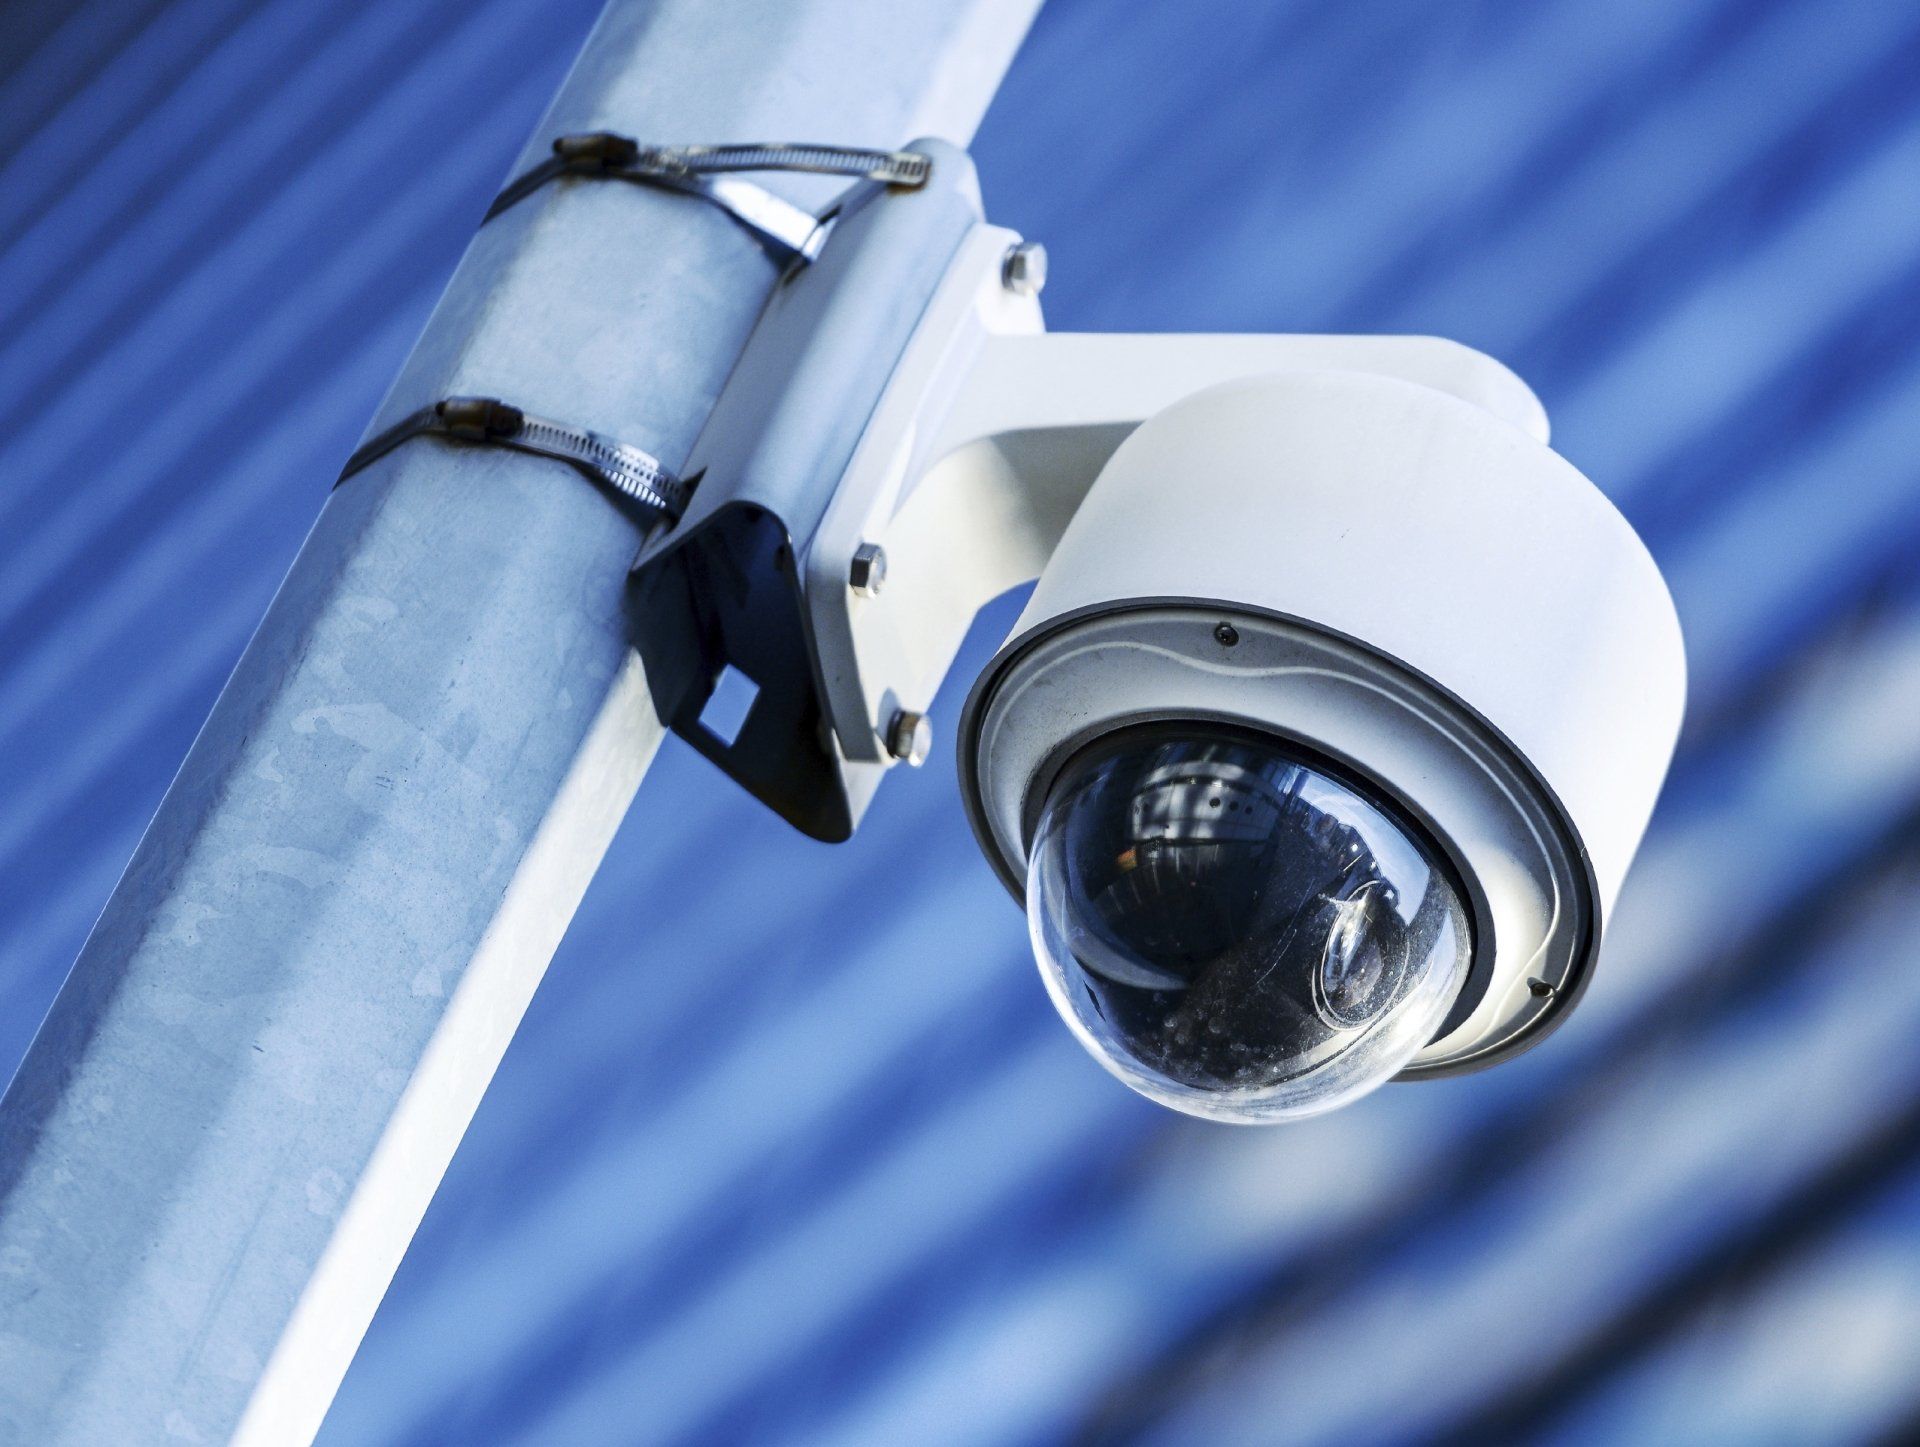 A security camera is mounted to a metal pole